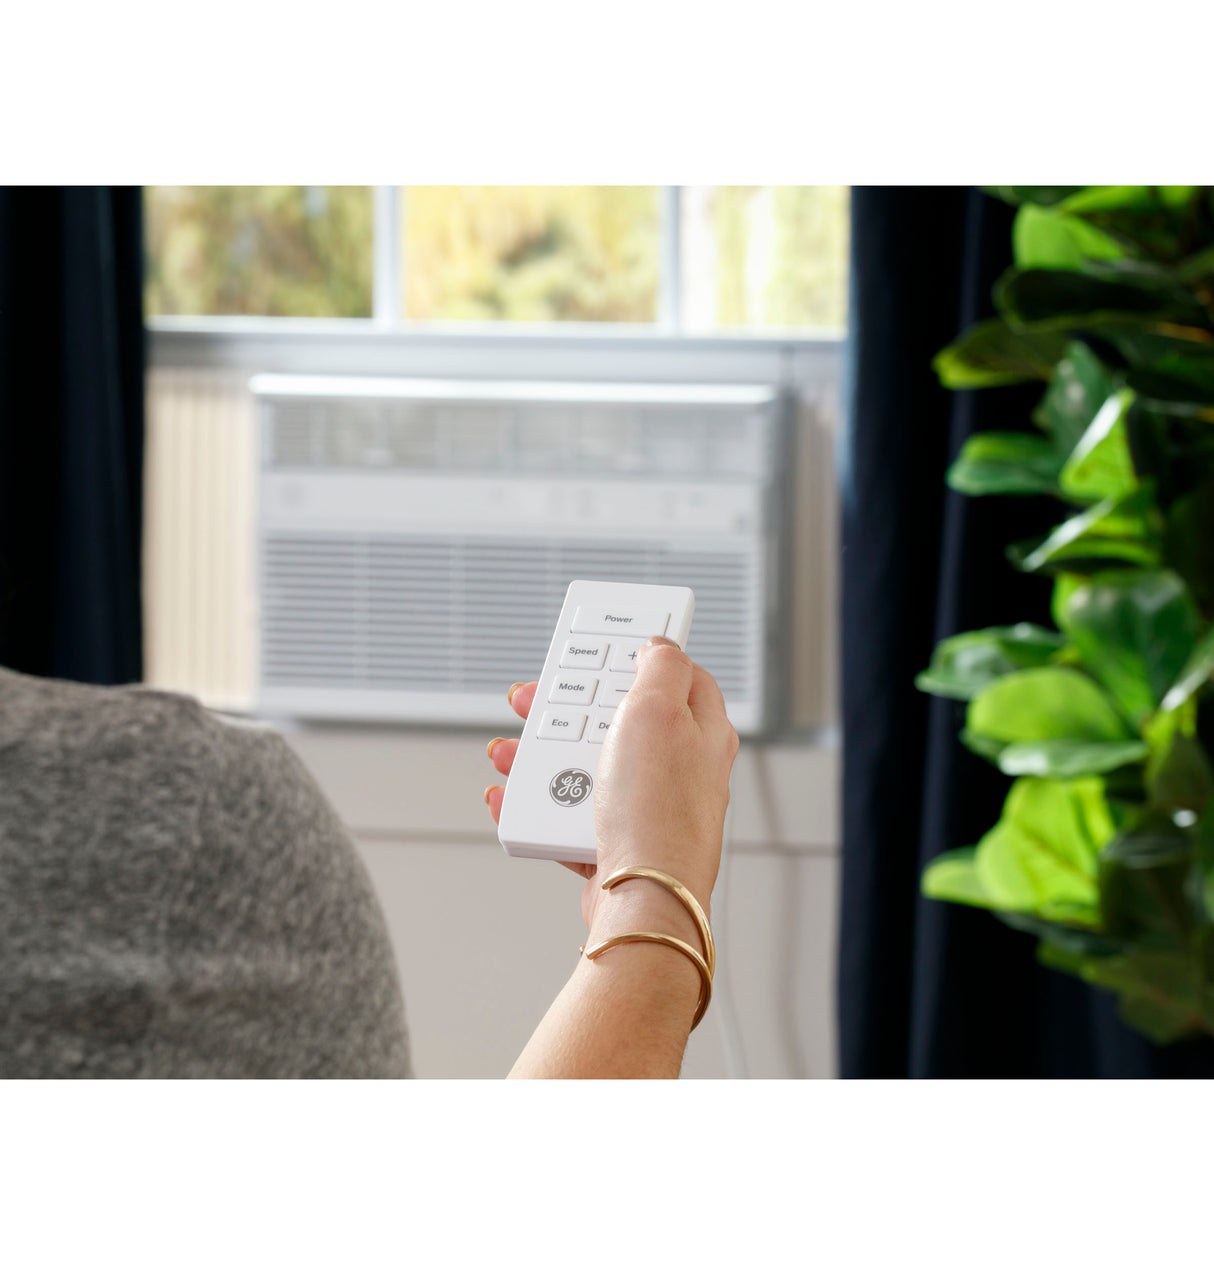 GE(R) 18,600 BTU Smart Electronic Window Air Conditioner for Extra-Large Rooms up to 1000 sq. ft. - (AHFK18BA)